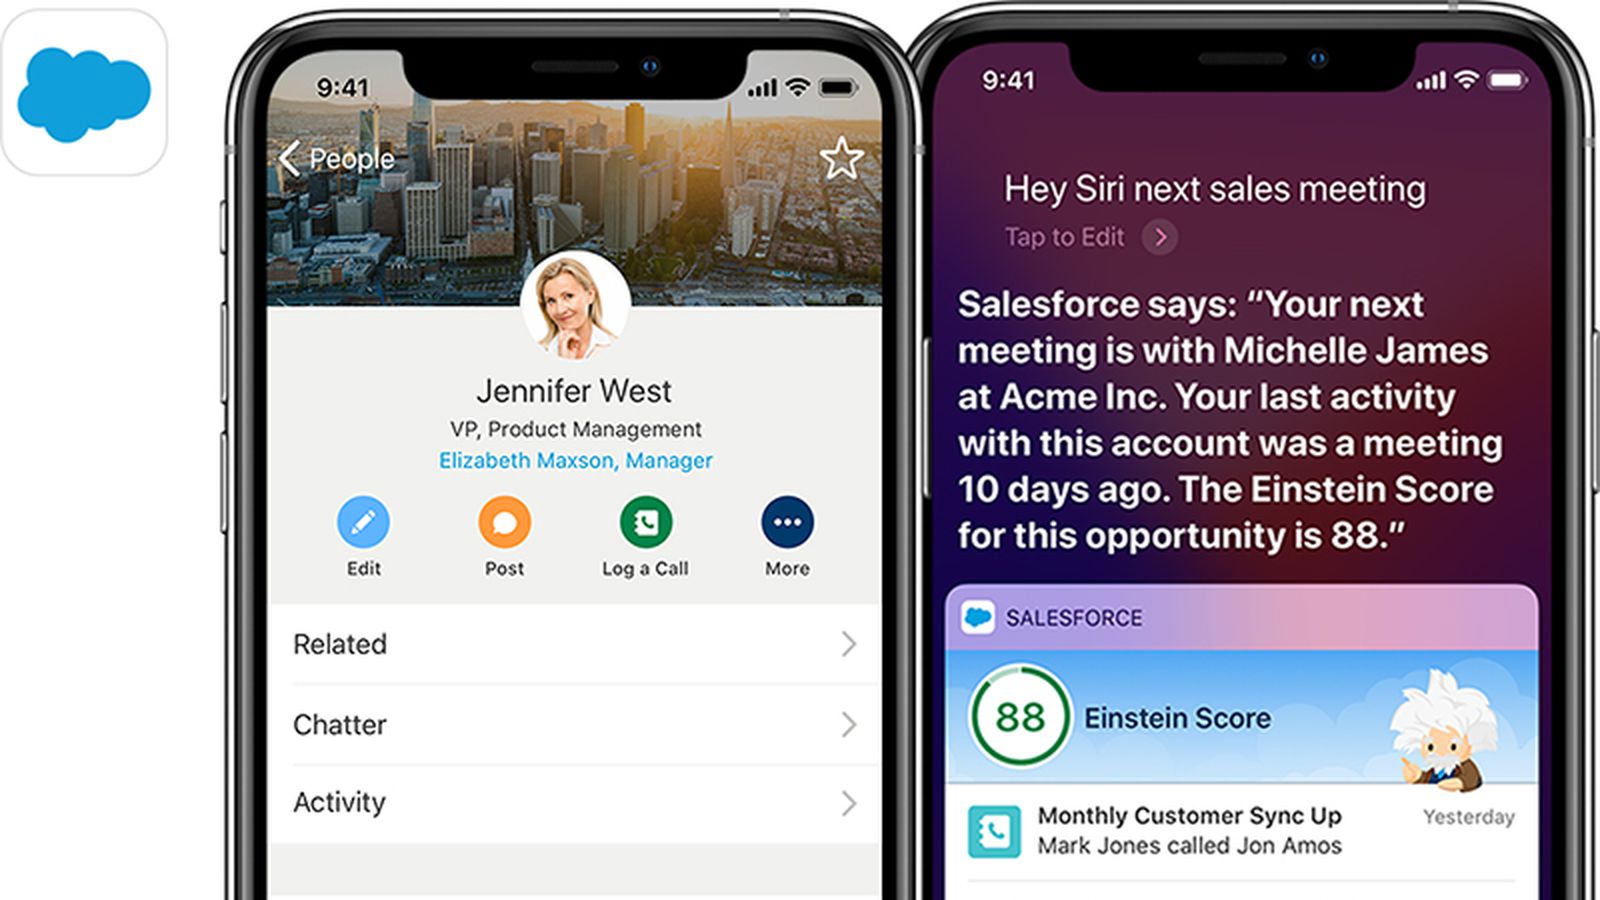 Salesforce Partners With Apple, Will Release SDK for iOS Later This Year  and Redesigned iOS App in Early 2019 - MacRumors